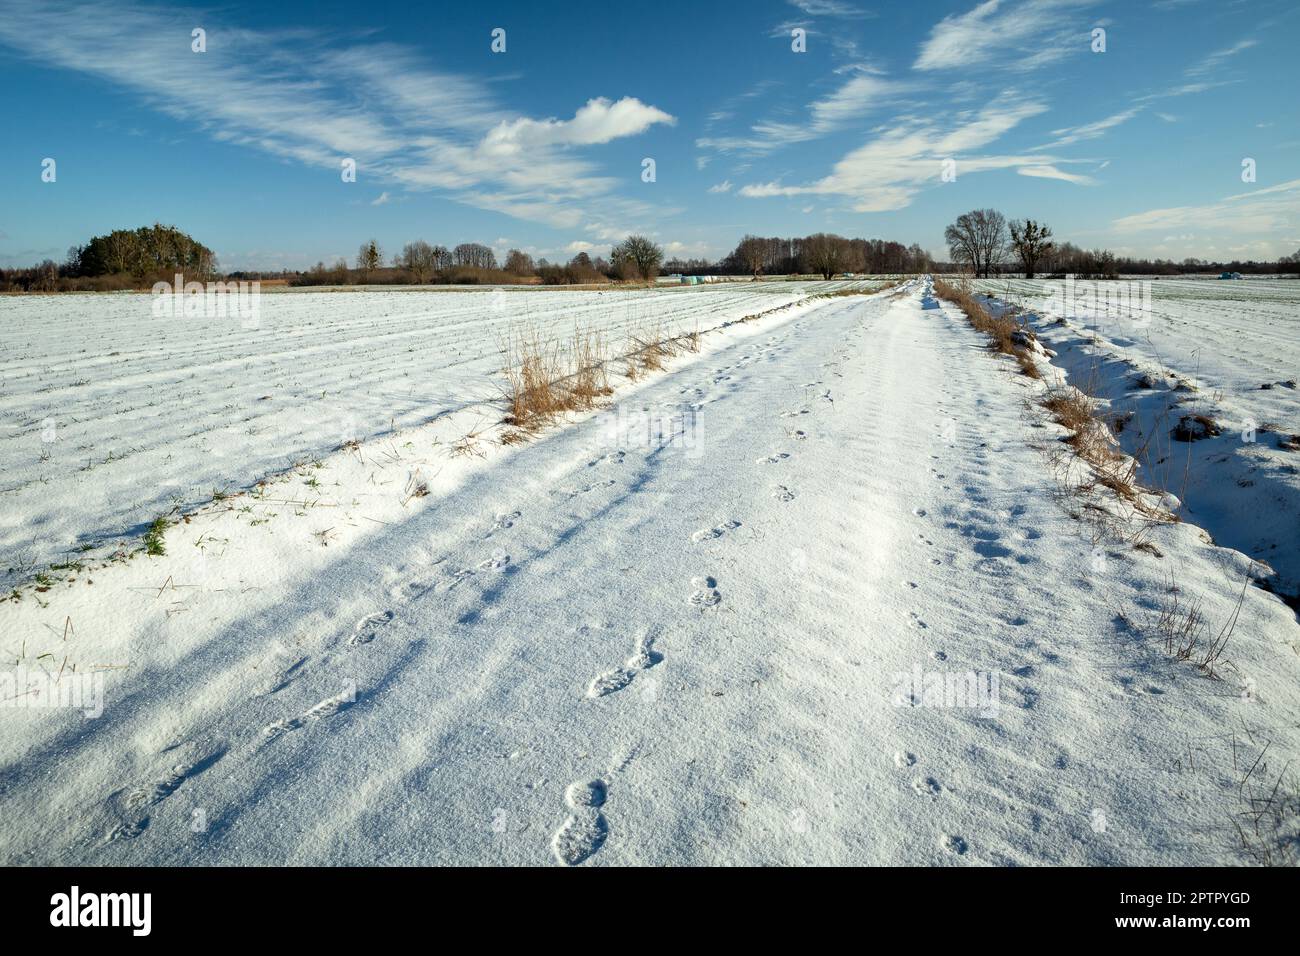 Footprints on a snow-covered road between fields, winter sunny day Stock Photo